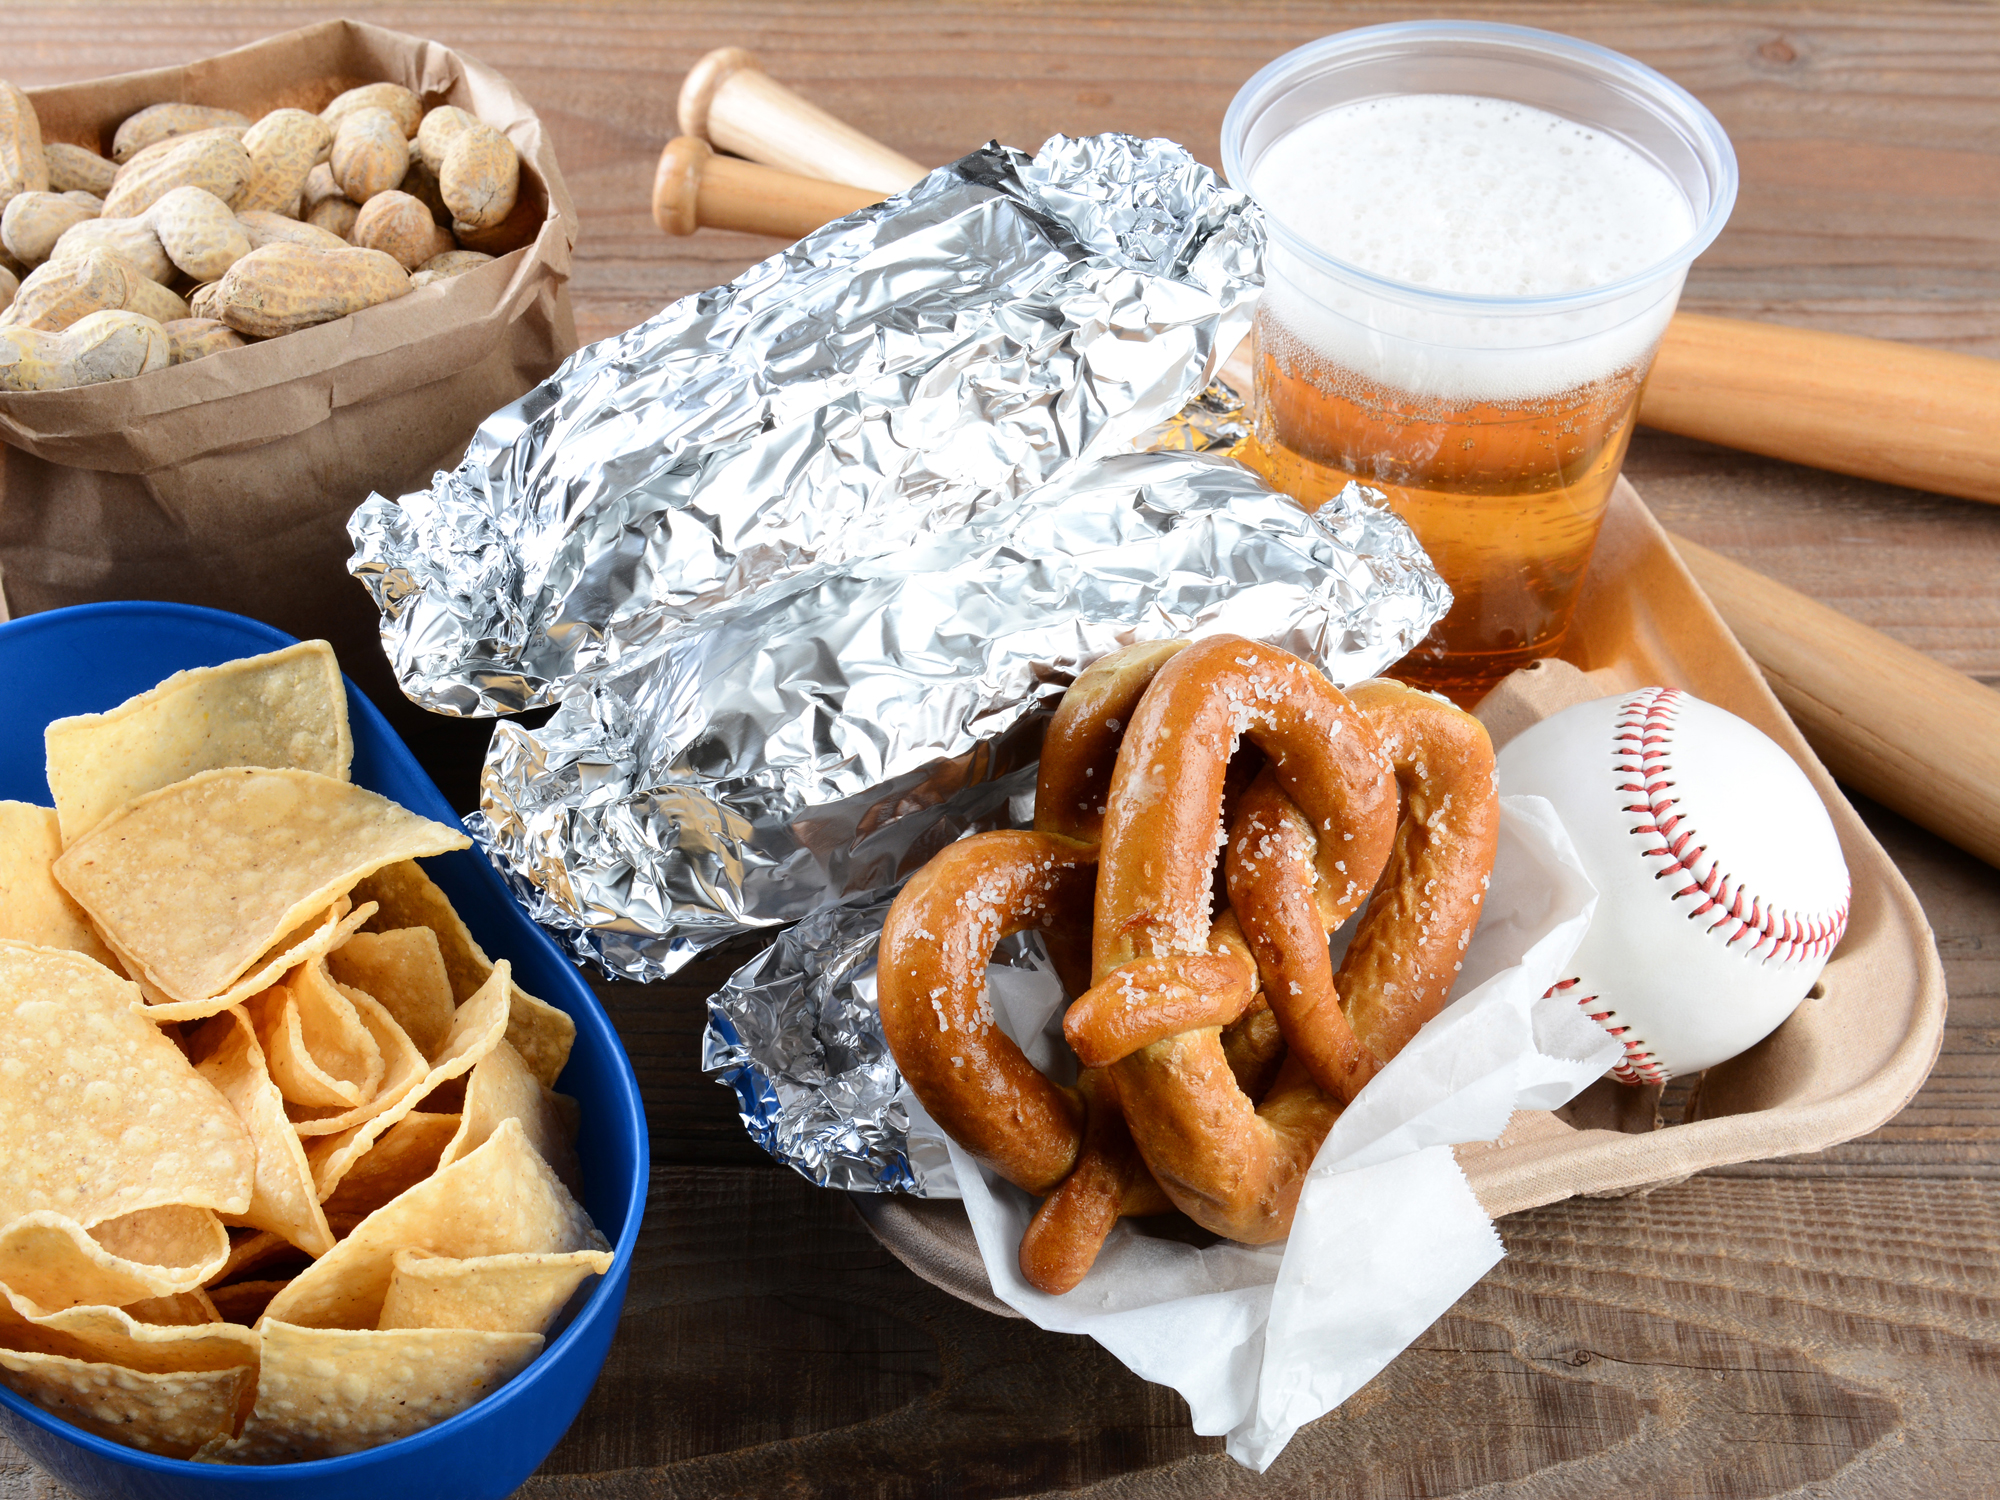 The game day snack that’s a home run for your arteries